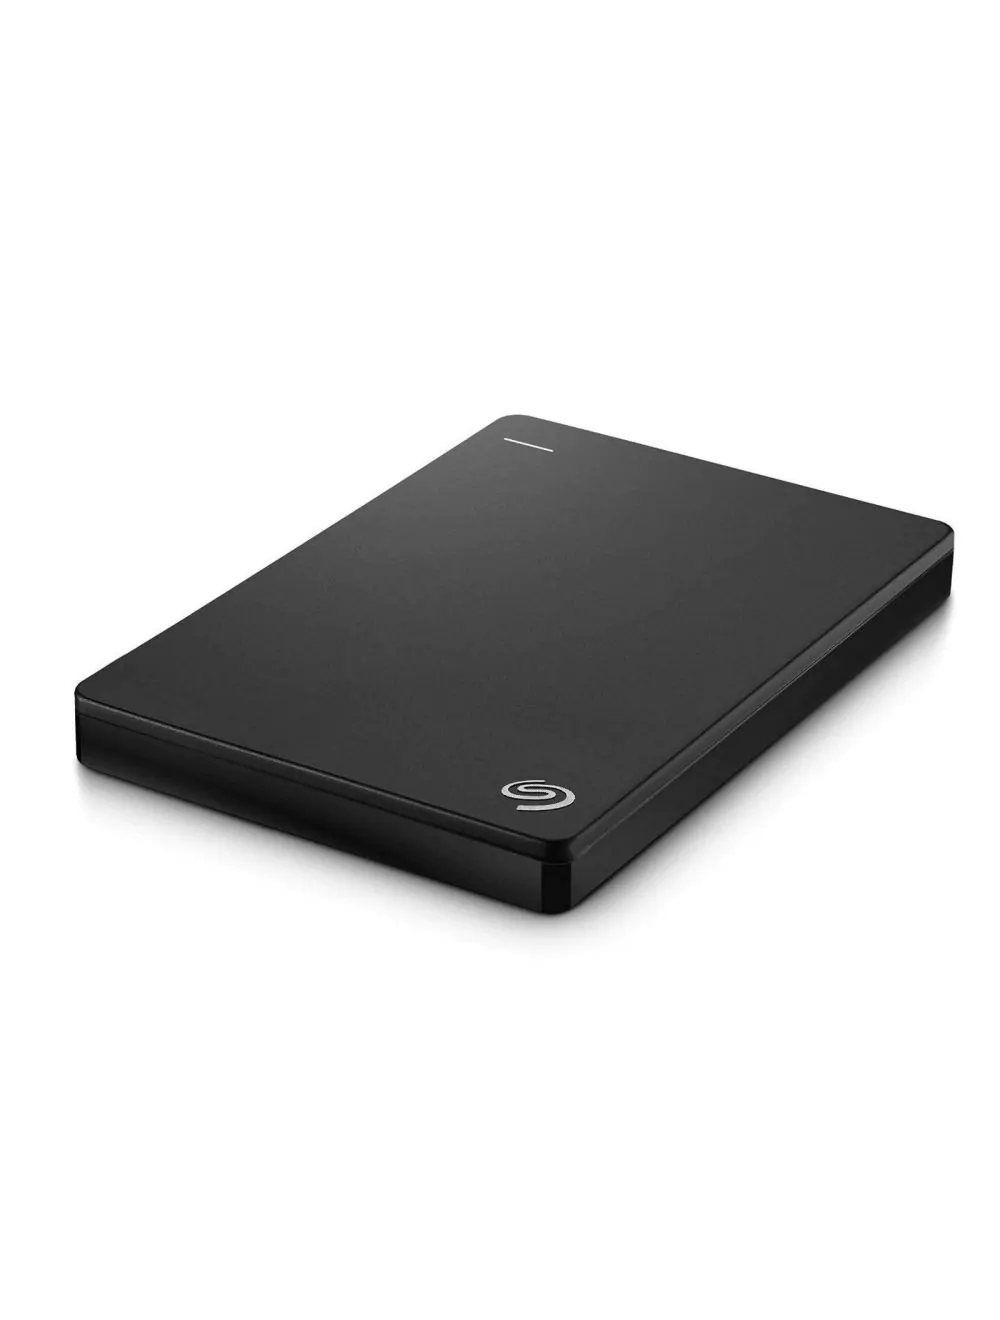 Buy Seagate Backup Plus 1 TB External Hard Disk - Placewell Retail